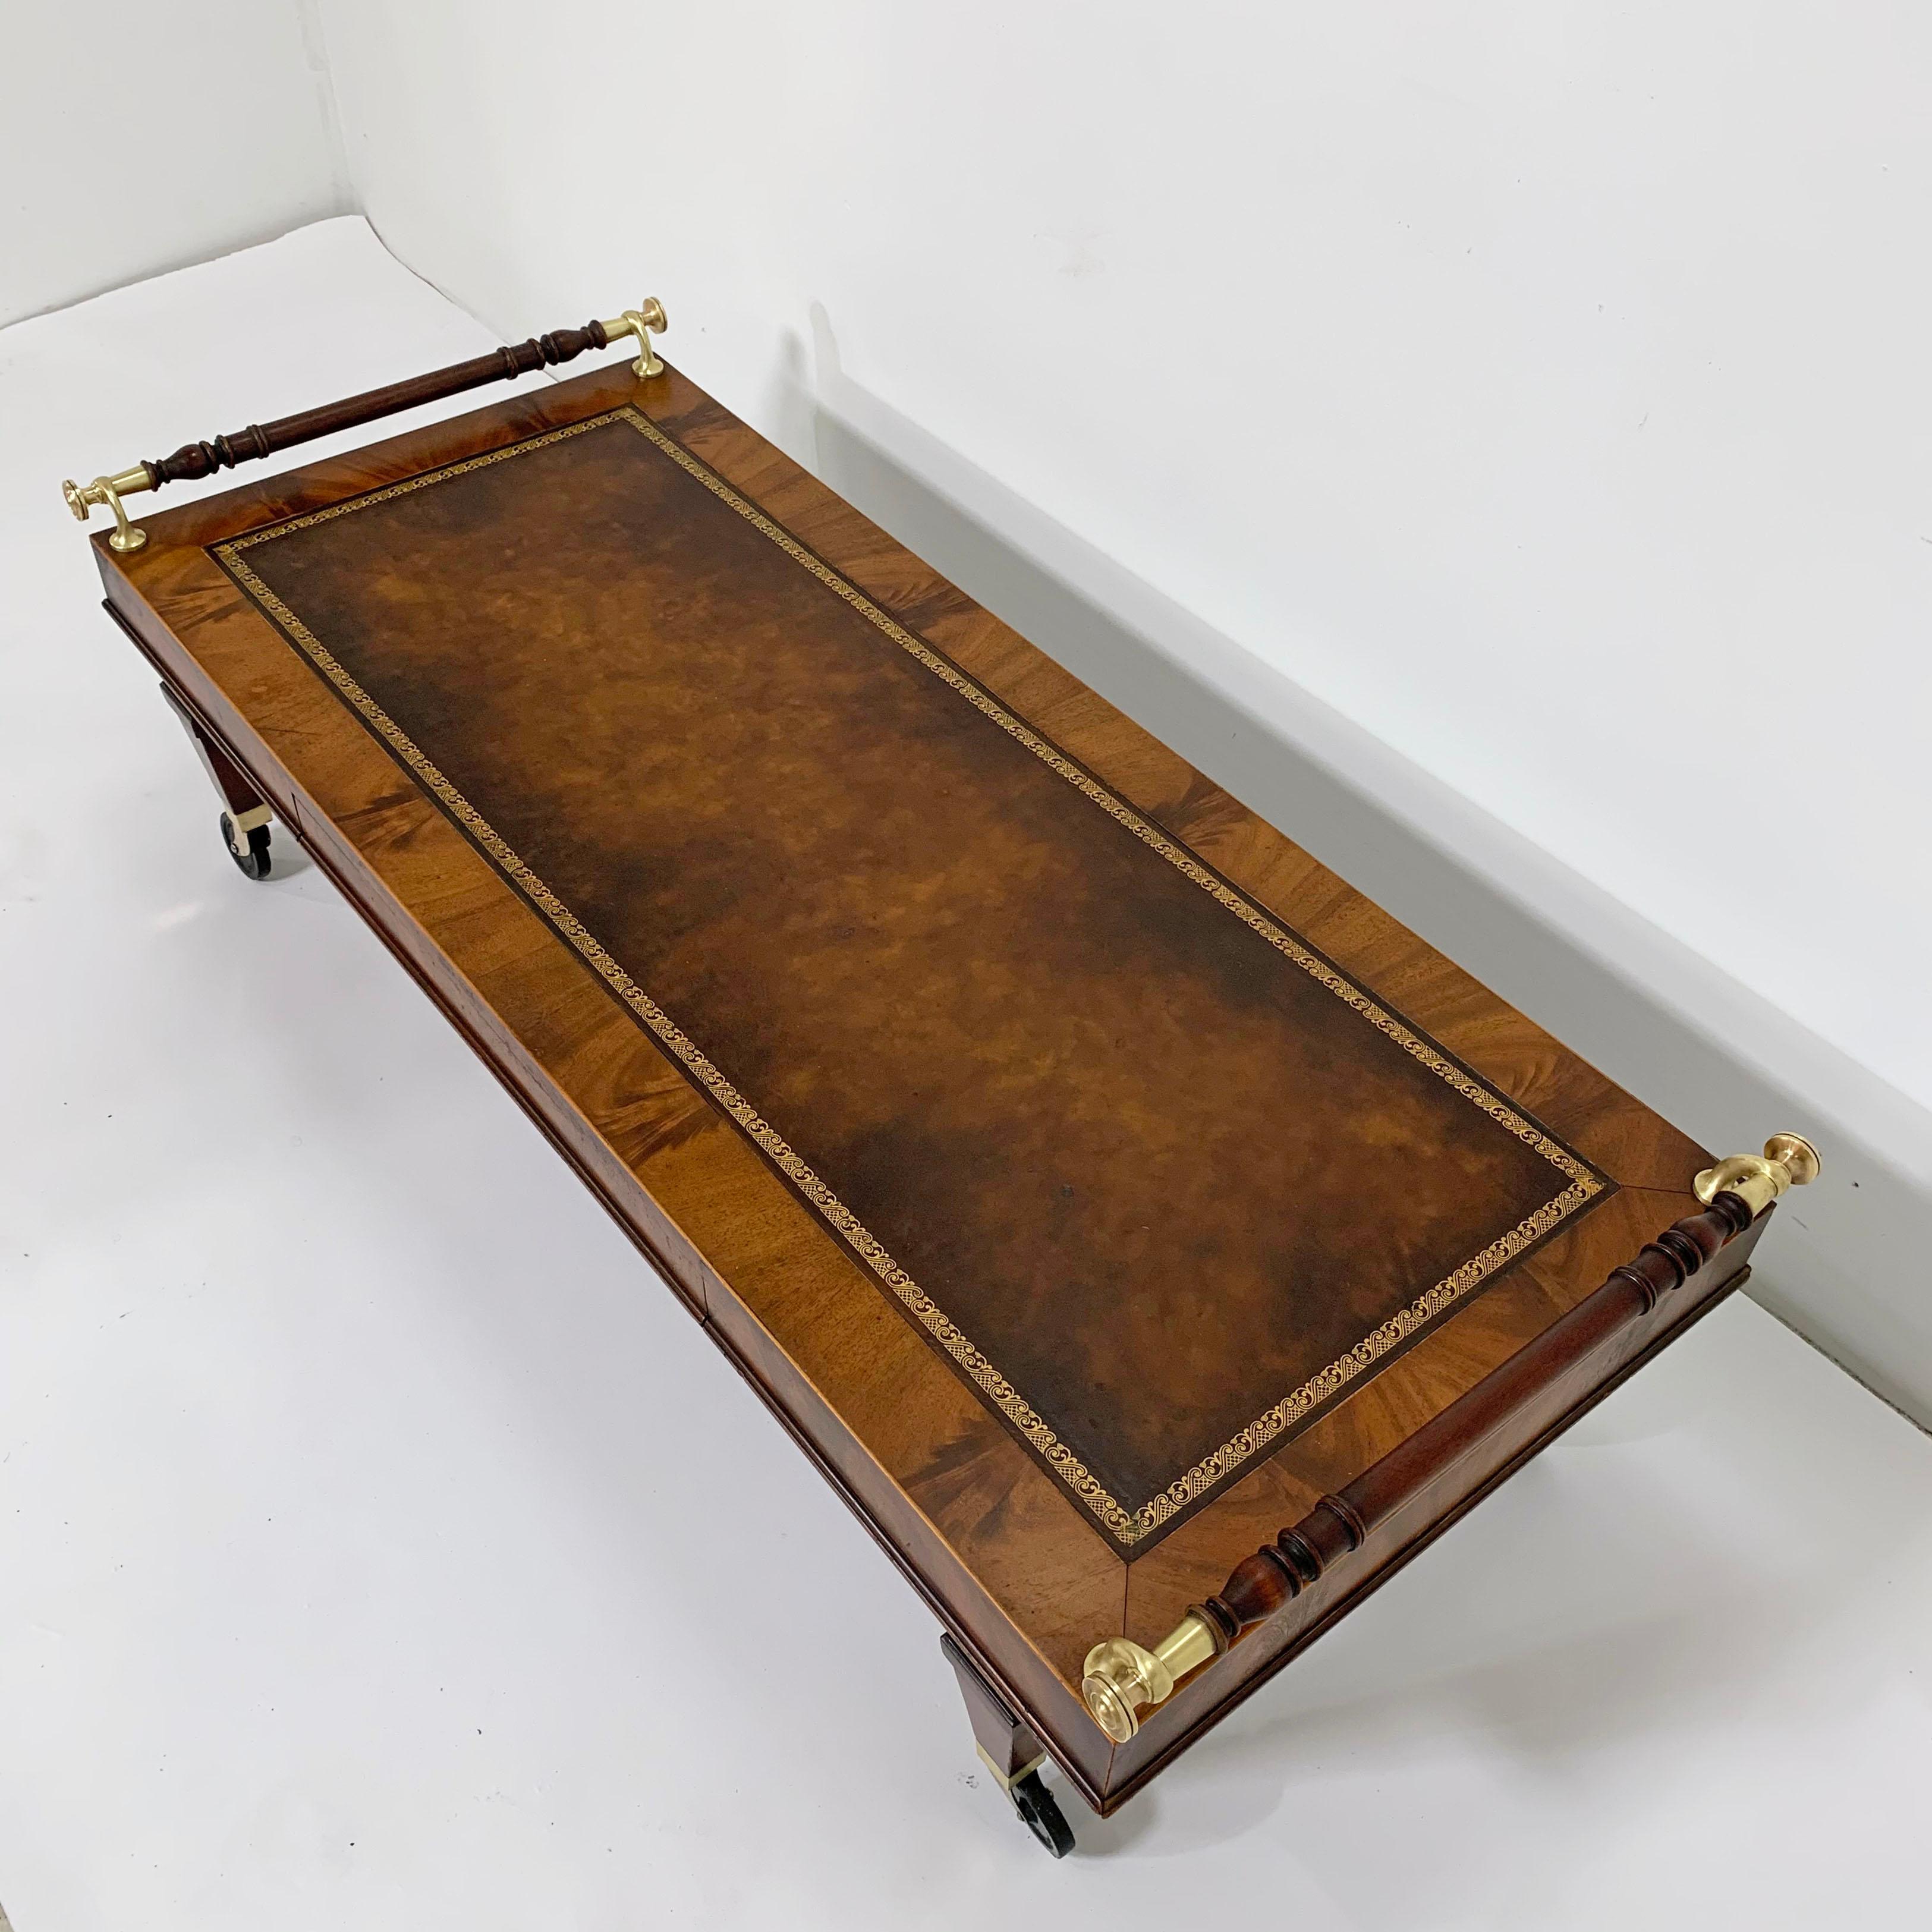 A rare form Regency style coffee table in mahogany with embossed leather top, turned walnut rail bars with solid brass hardware, and casters, circa 1930s. Single shallow drawer on one side. By Weiman for their early 20th century 